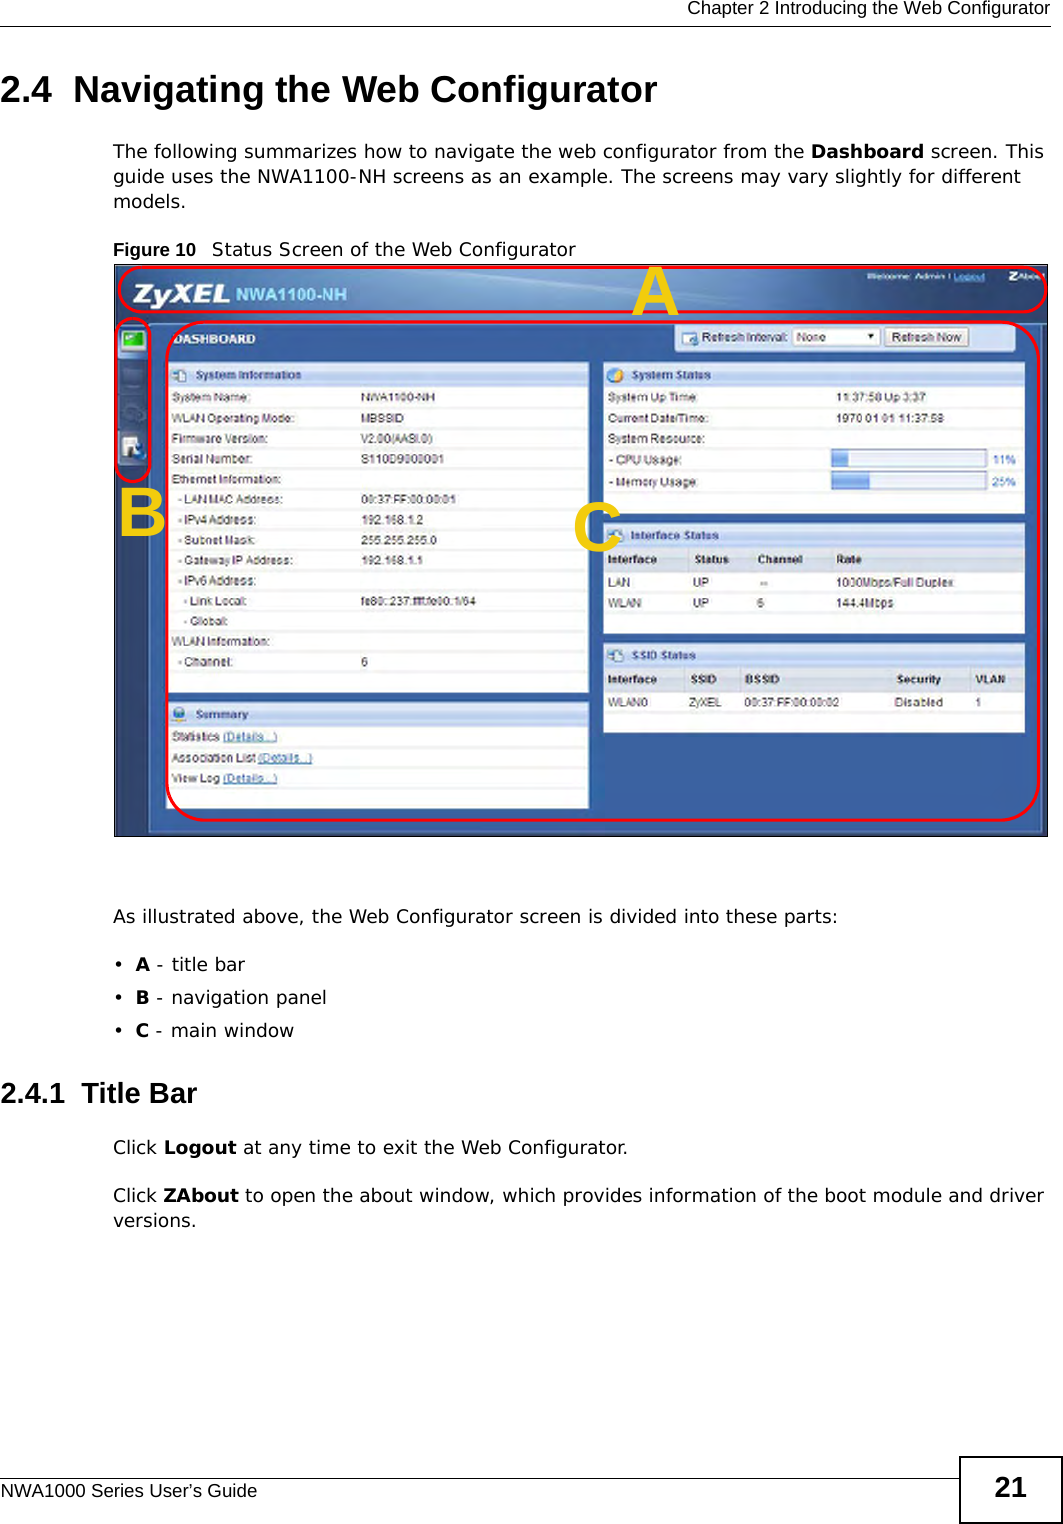  Chapter 2 Introducing the Web ConfiguratorNWA1000 Series User’s Guide 212.4  Navigating the Web ConfiguratorThe following summarizes how to navigate the web configurator from the Dashboard screen. This guide uses the NWA1100-NH screens as an example. The screens may vary slightly for different models.Figure 10   Status Screen of the Web ConfiguratorAs illustrated above, the Web Configurator screen is divided into these parts:•A - title bar•B - navigation panel•C - main window2.4.1  Title BarClick Logout at any time to exit the Web Configurator.Click ZAbout to open the about window, which provides information of the boot module and driver versions.ABC